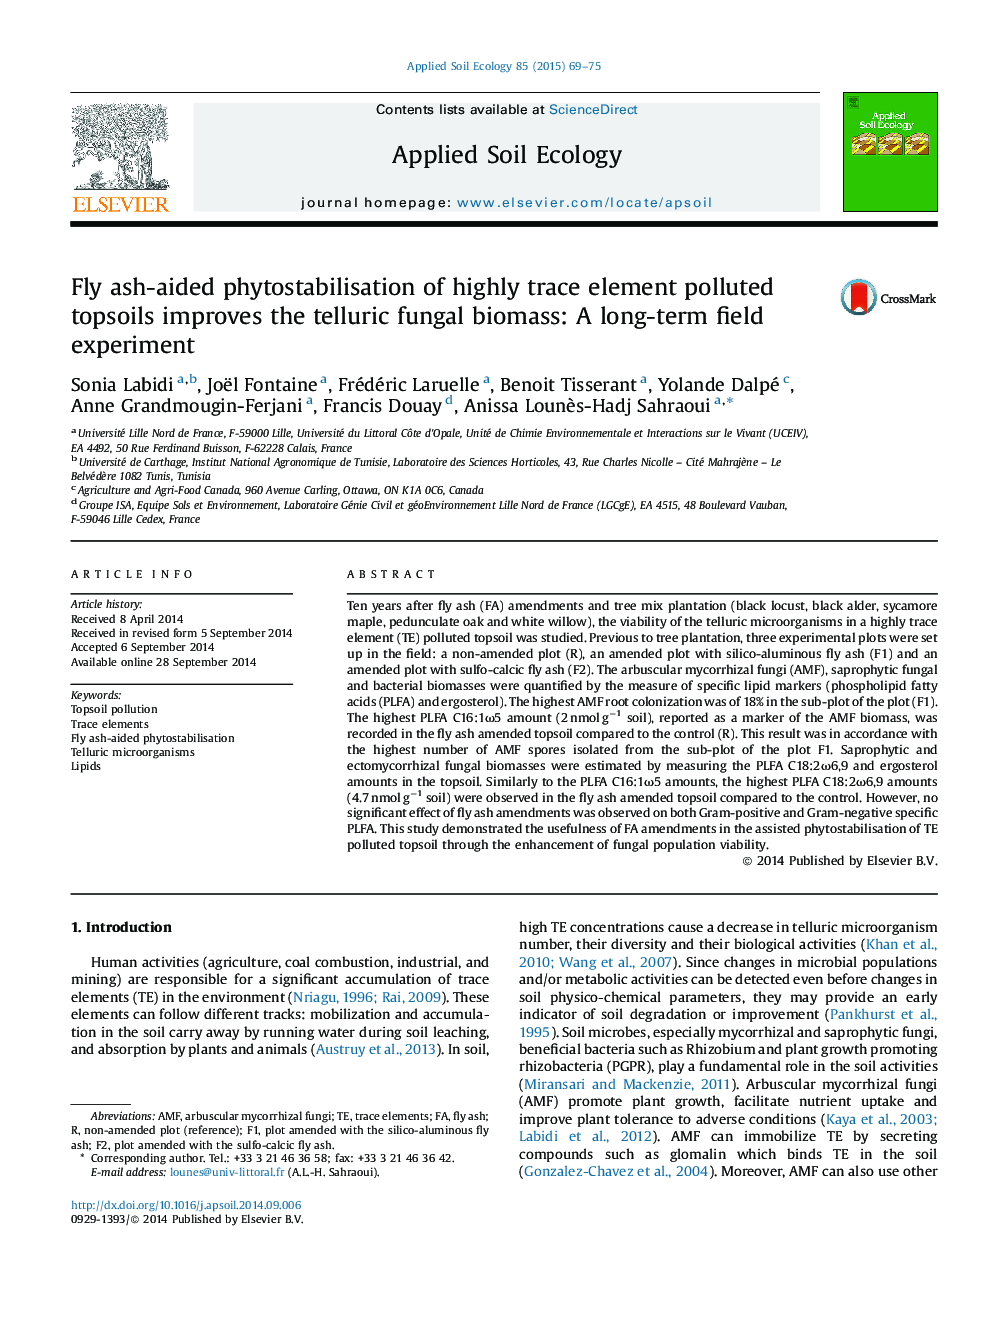 Fly ash-aided phytostabilisation of highly trace element polluted topsoils improves the telluric fungal biomass: A long-term field experiment